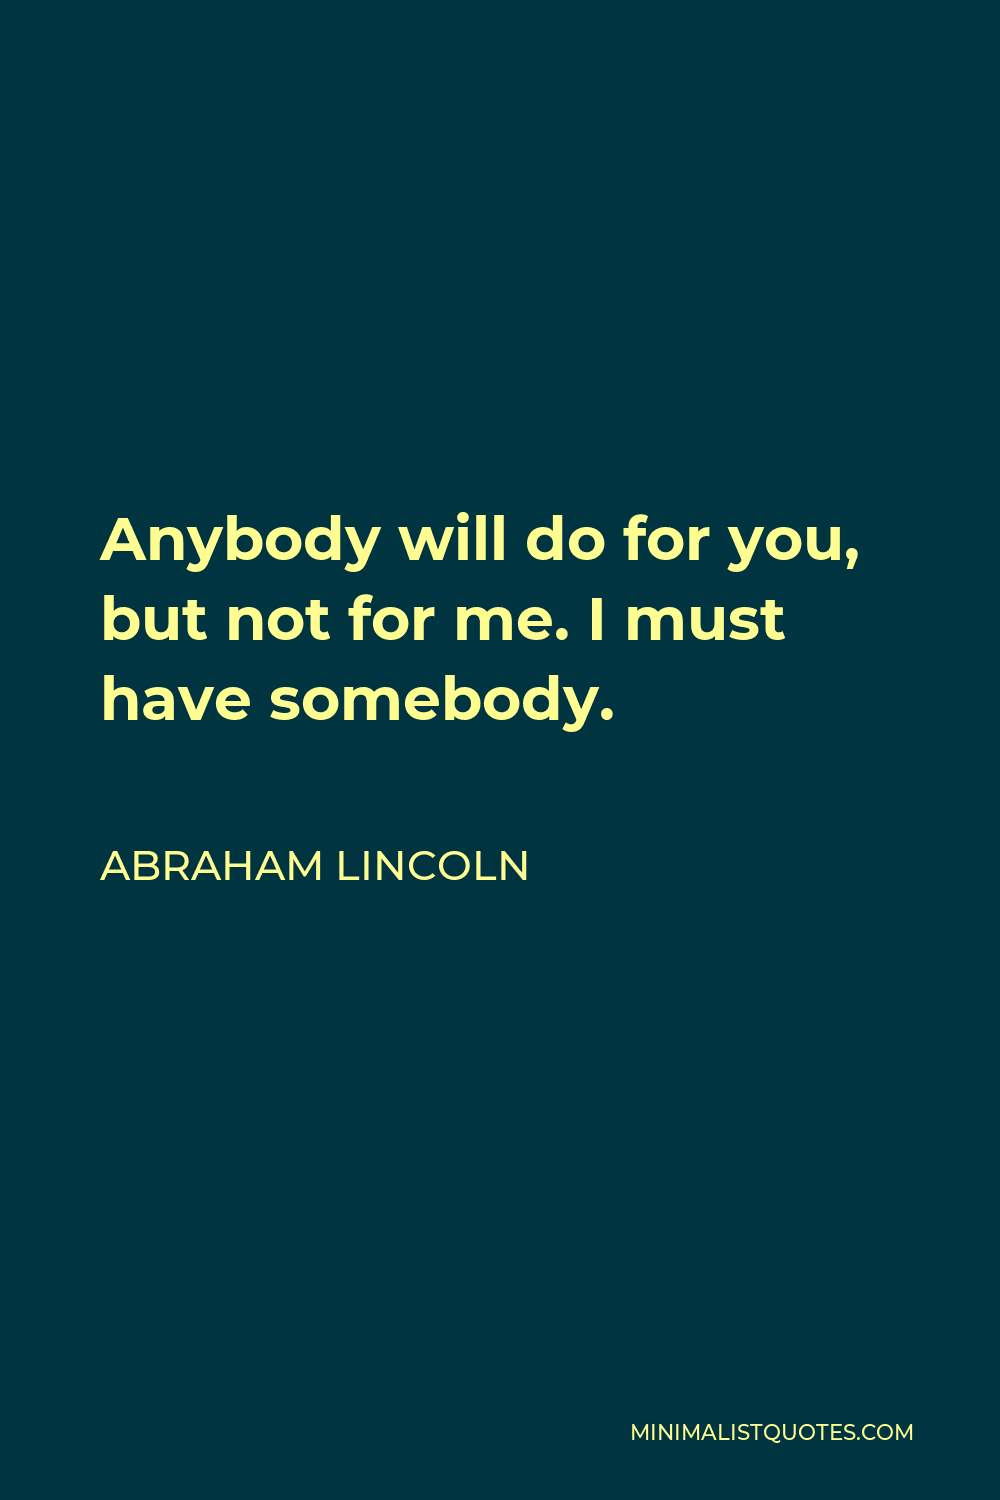 Abraham Lincoln Quote - Anybody will do for you, but not for me. I must have somebody.